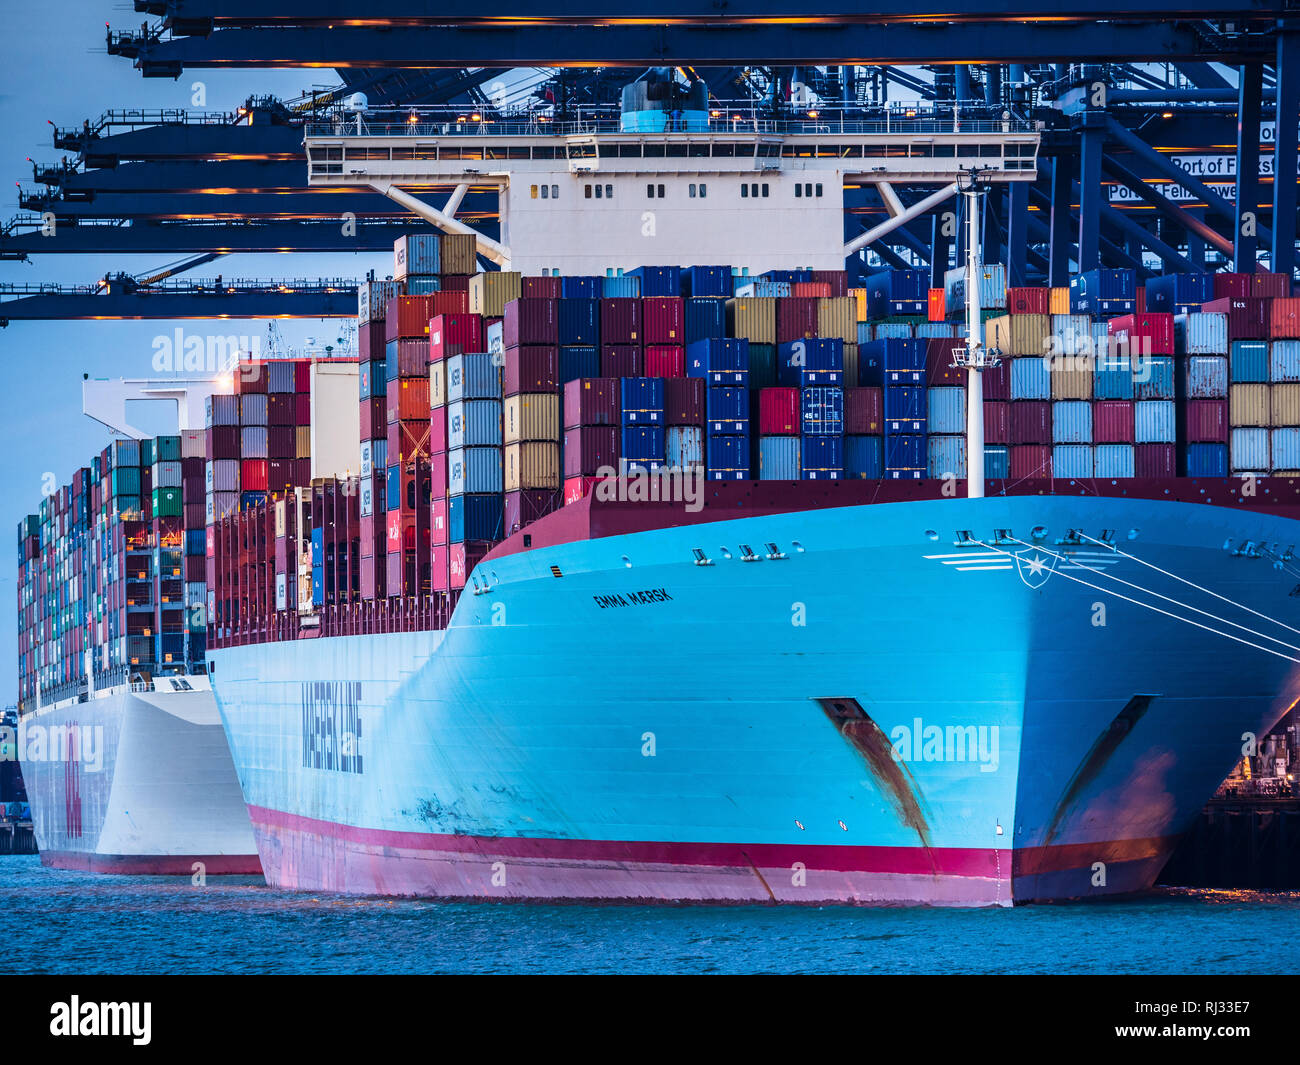 Trade - Maersk Line Container Ship Emma Maersk loads and unloads containers at the Port of Felixstowe, the largest container port in the UK Stock Photo